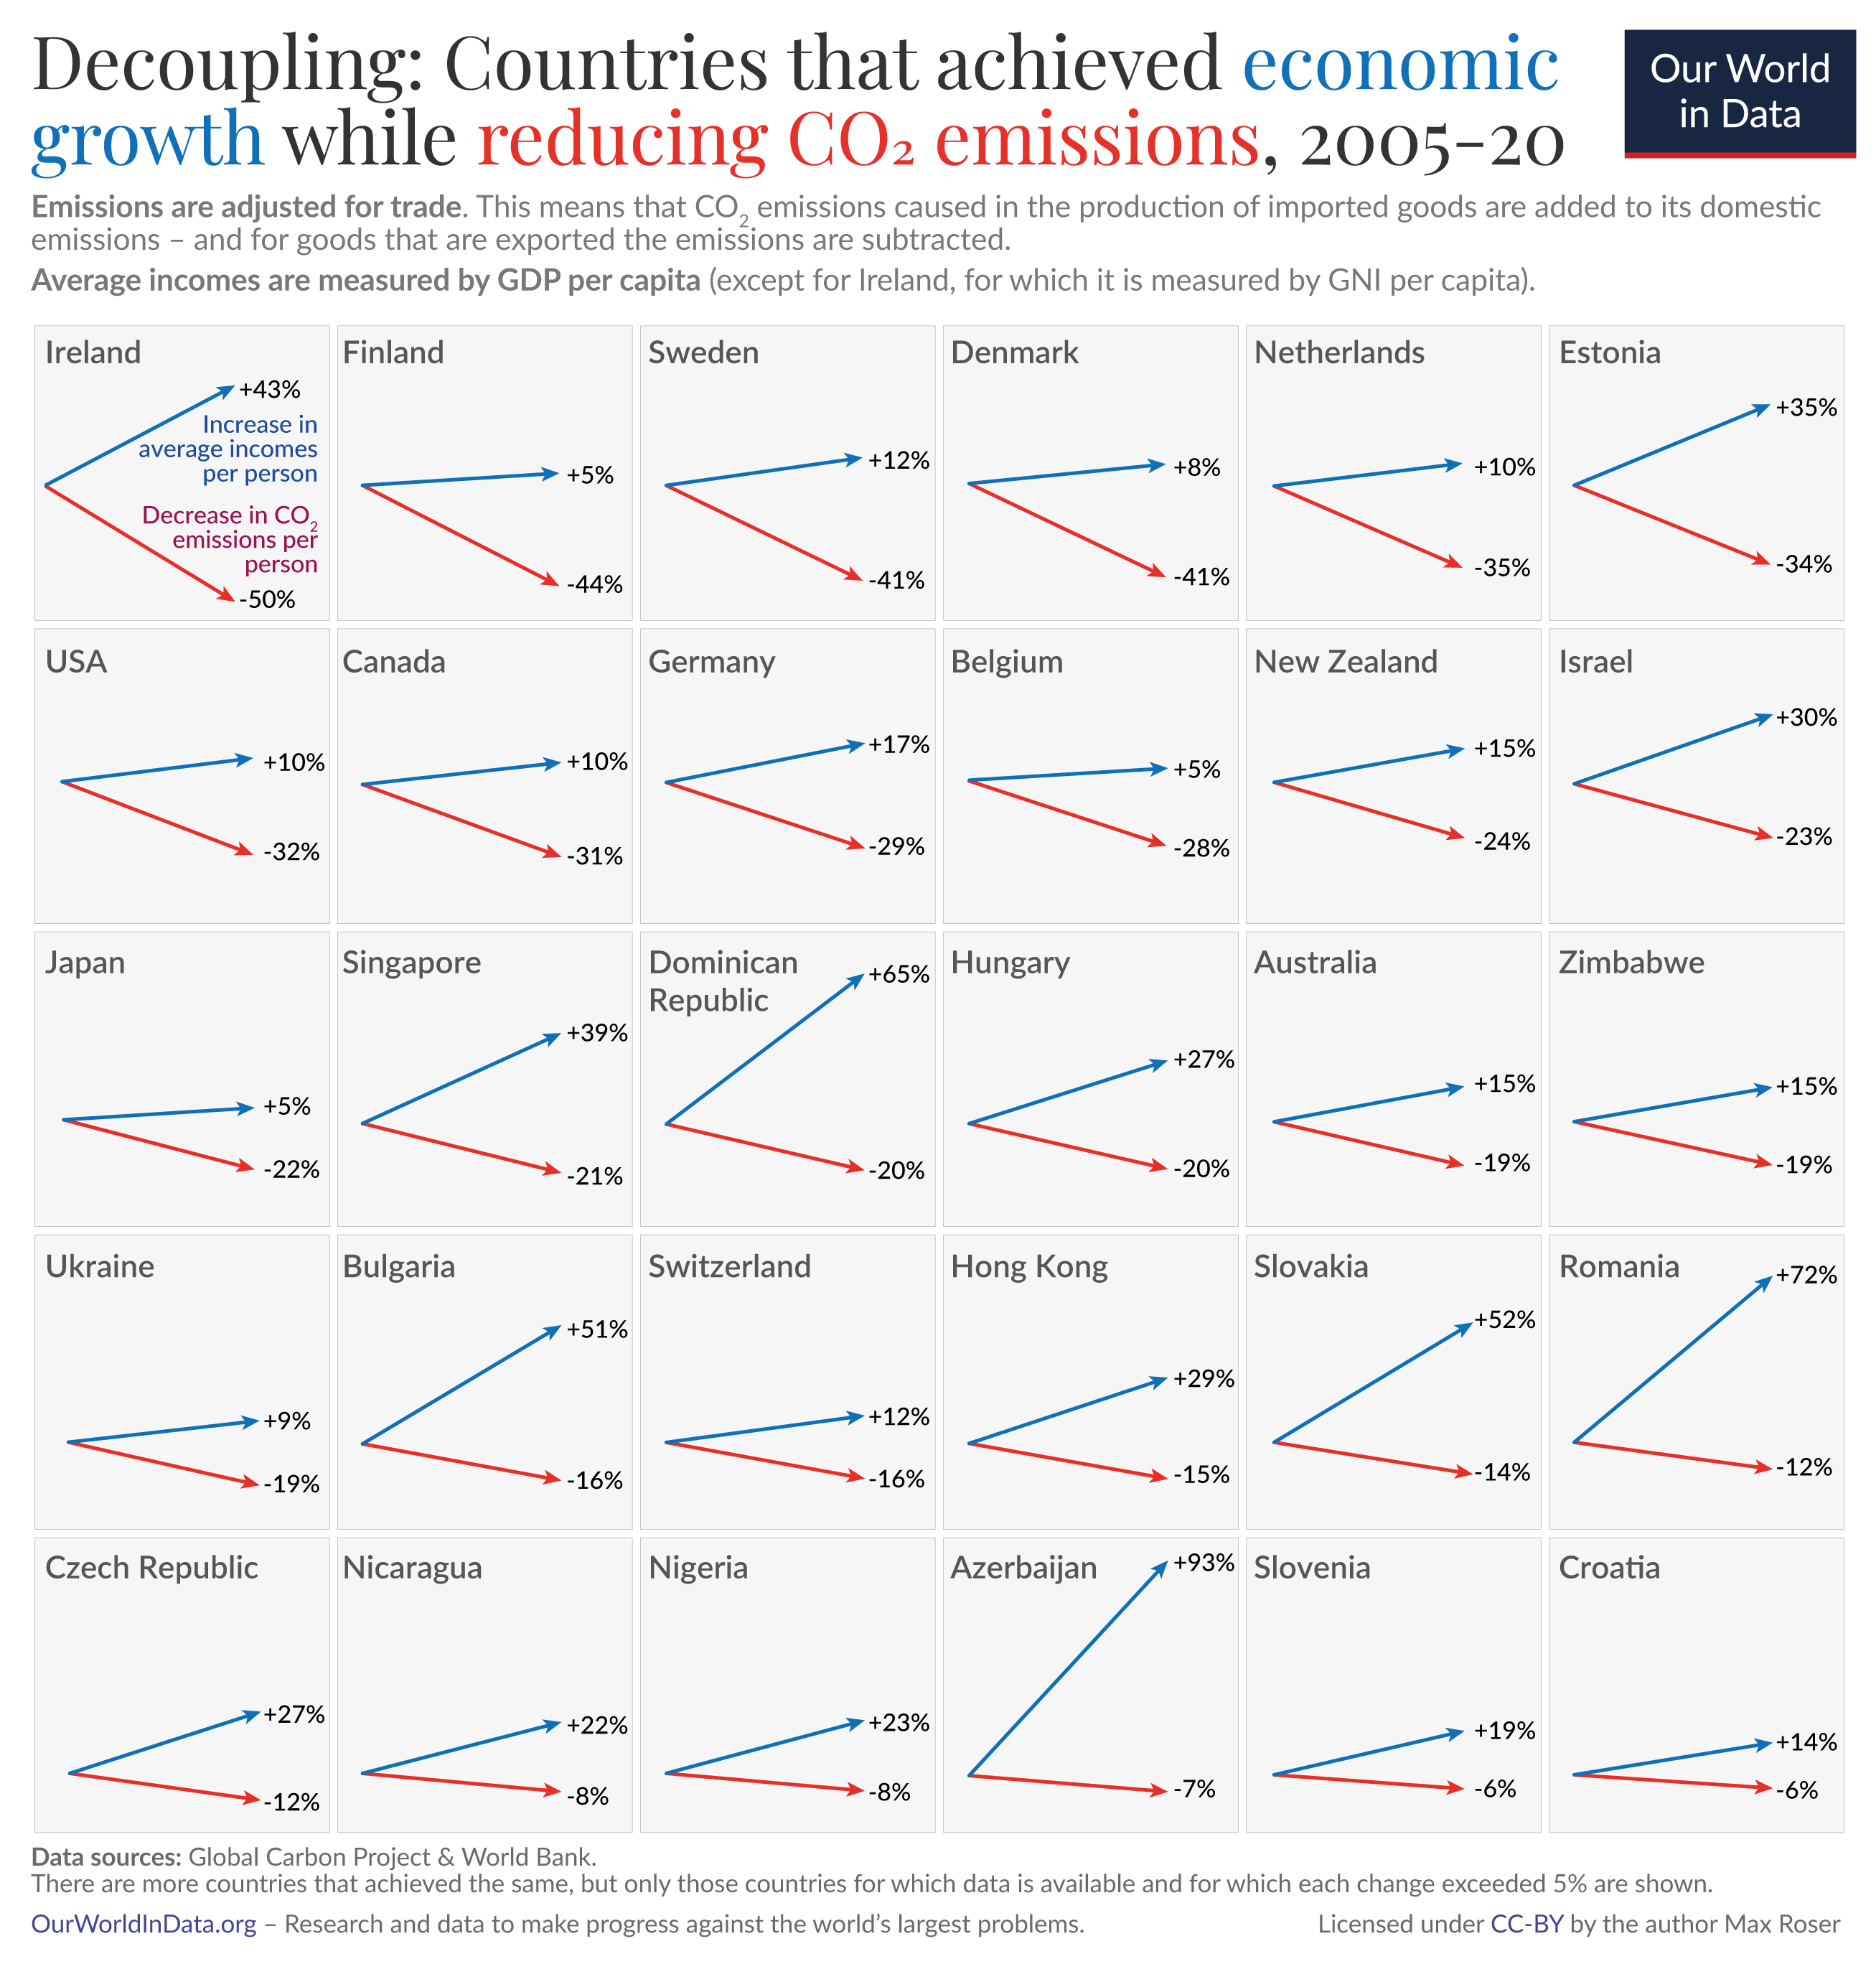 Grid of charts showing the percentage increase in GDP per capita and the percentage decrease in CO2 emissions per capita, for many countries.